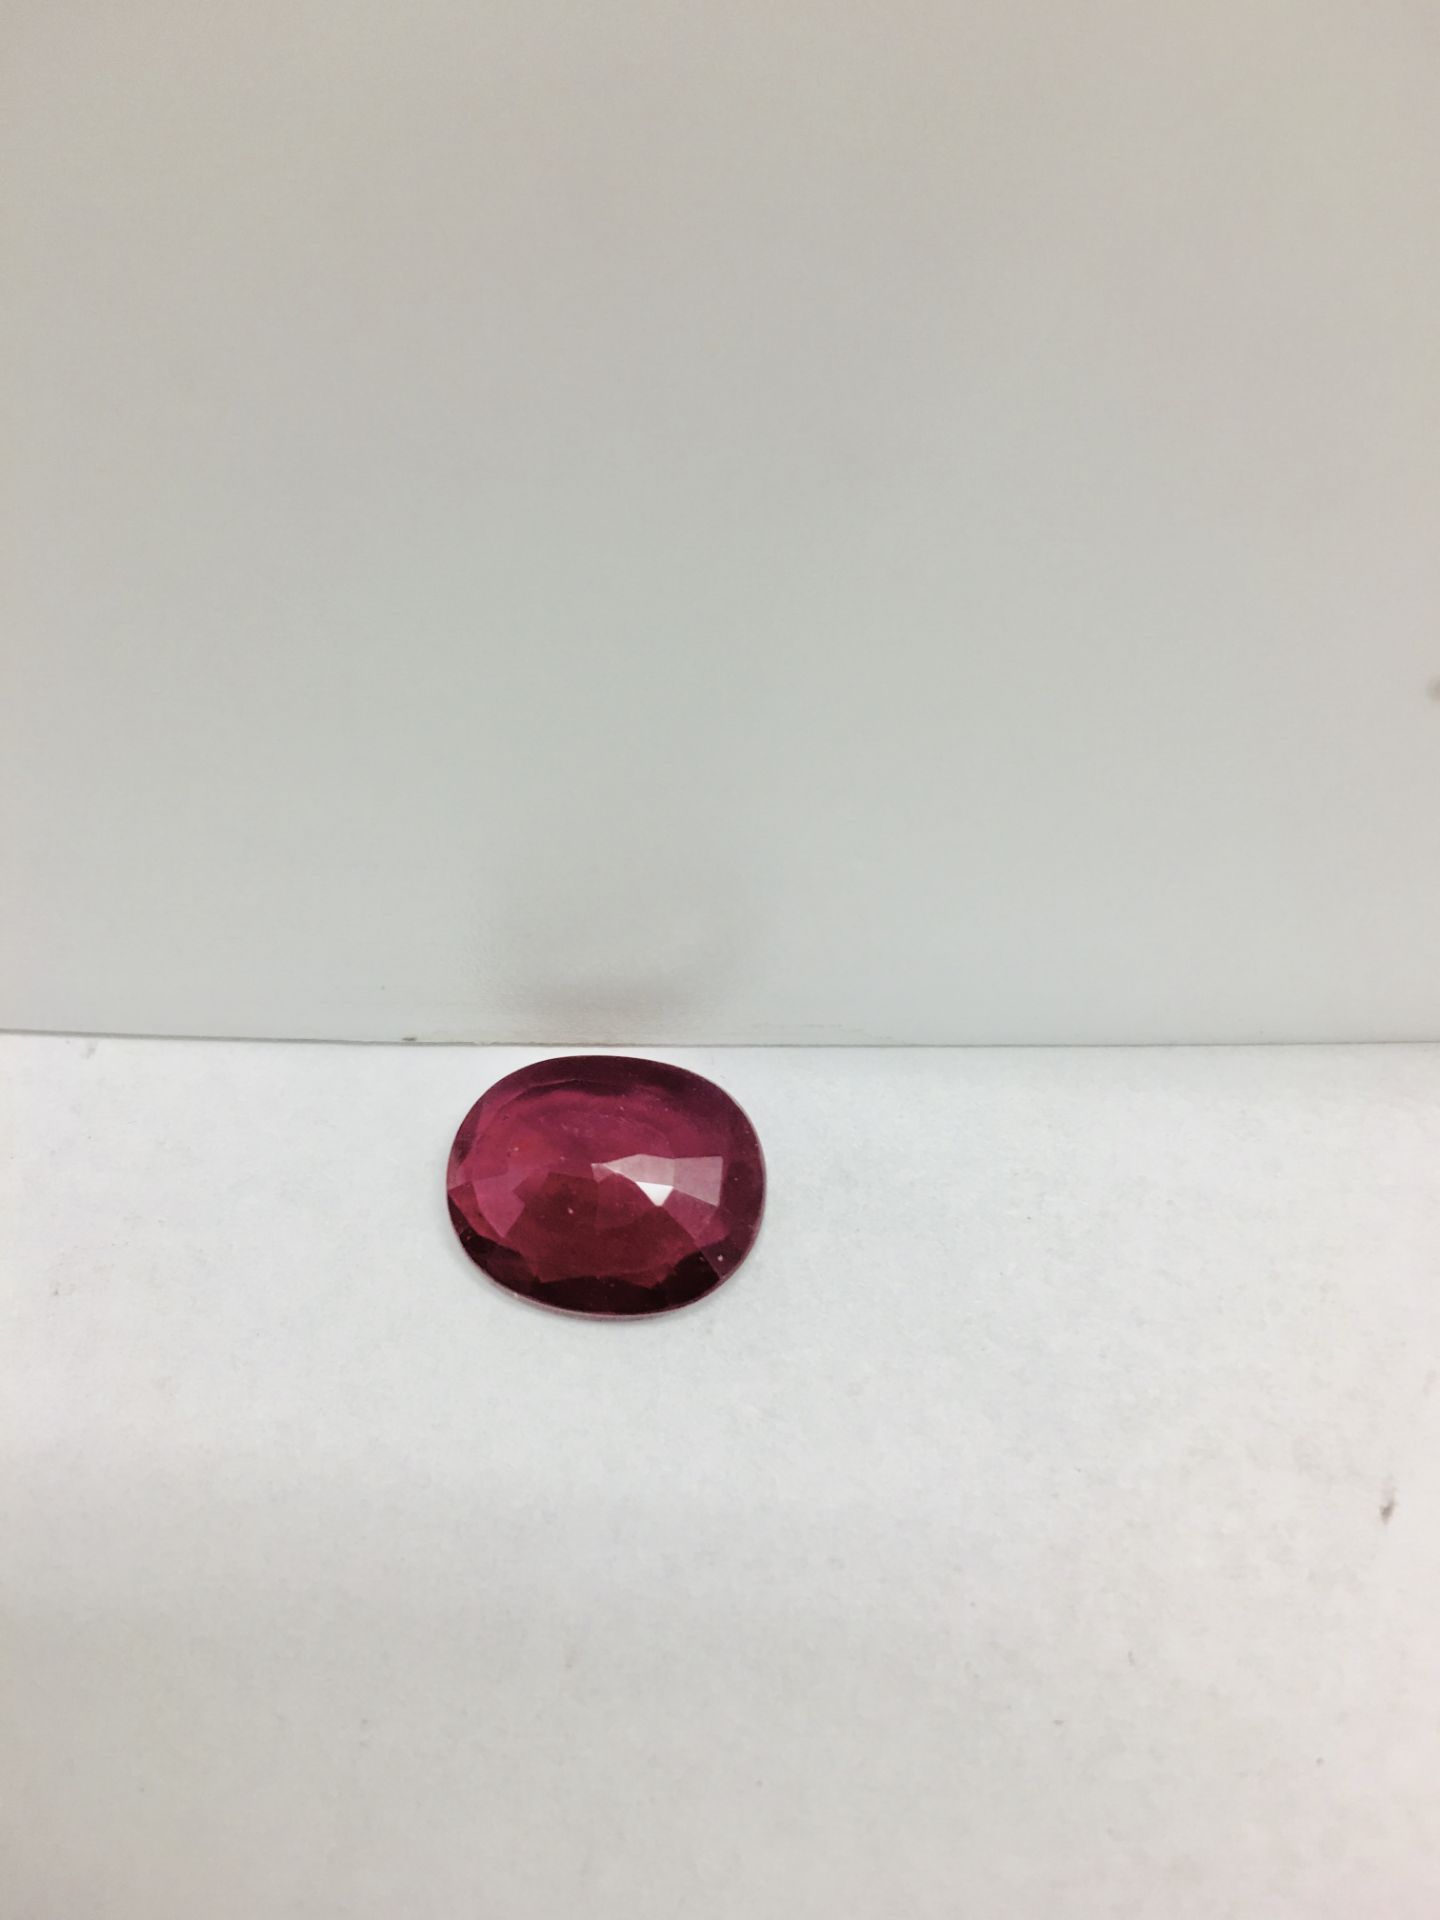 5.02ct ruby,Enhanced by Frature,good clarity and colour,12mmx10mm ,valued at 800 - Image 3 of 4